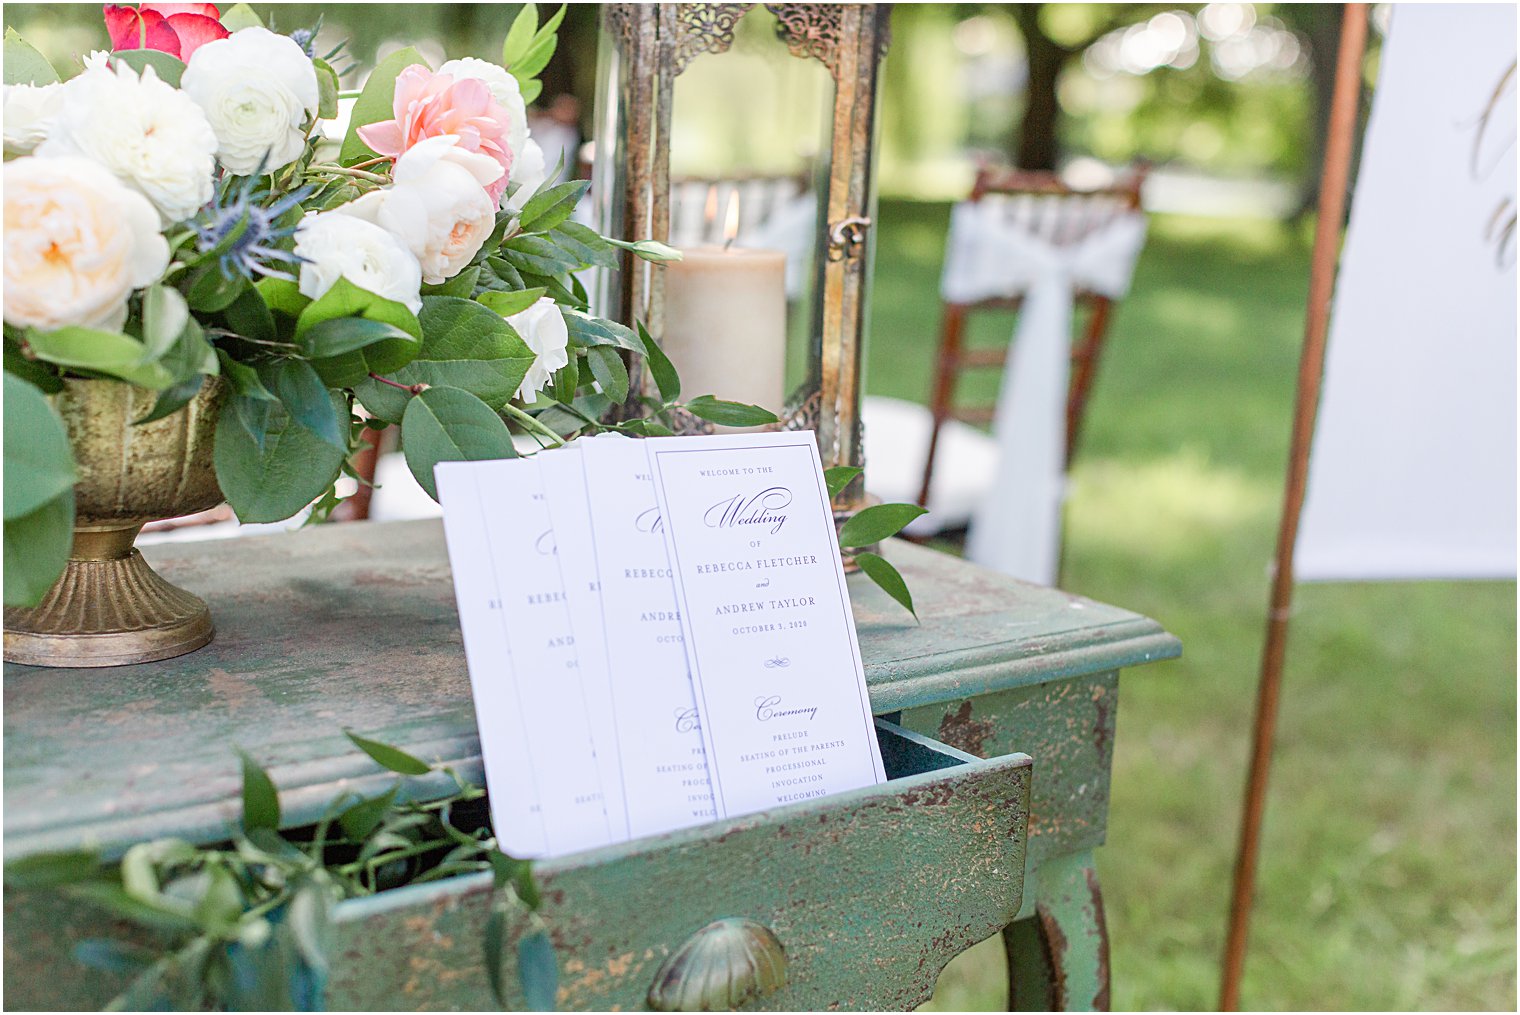 wedding programs on antiqued table with flowers